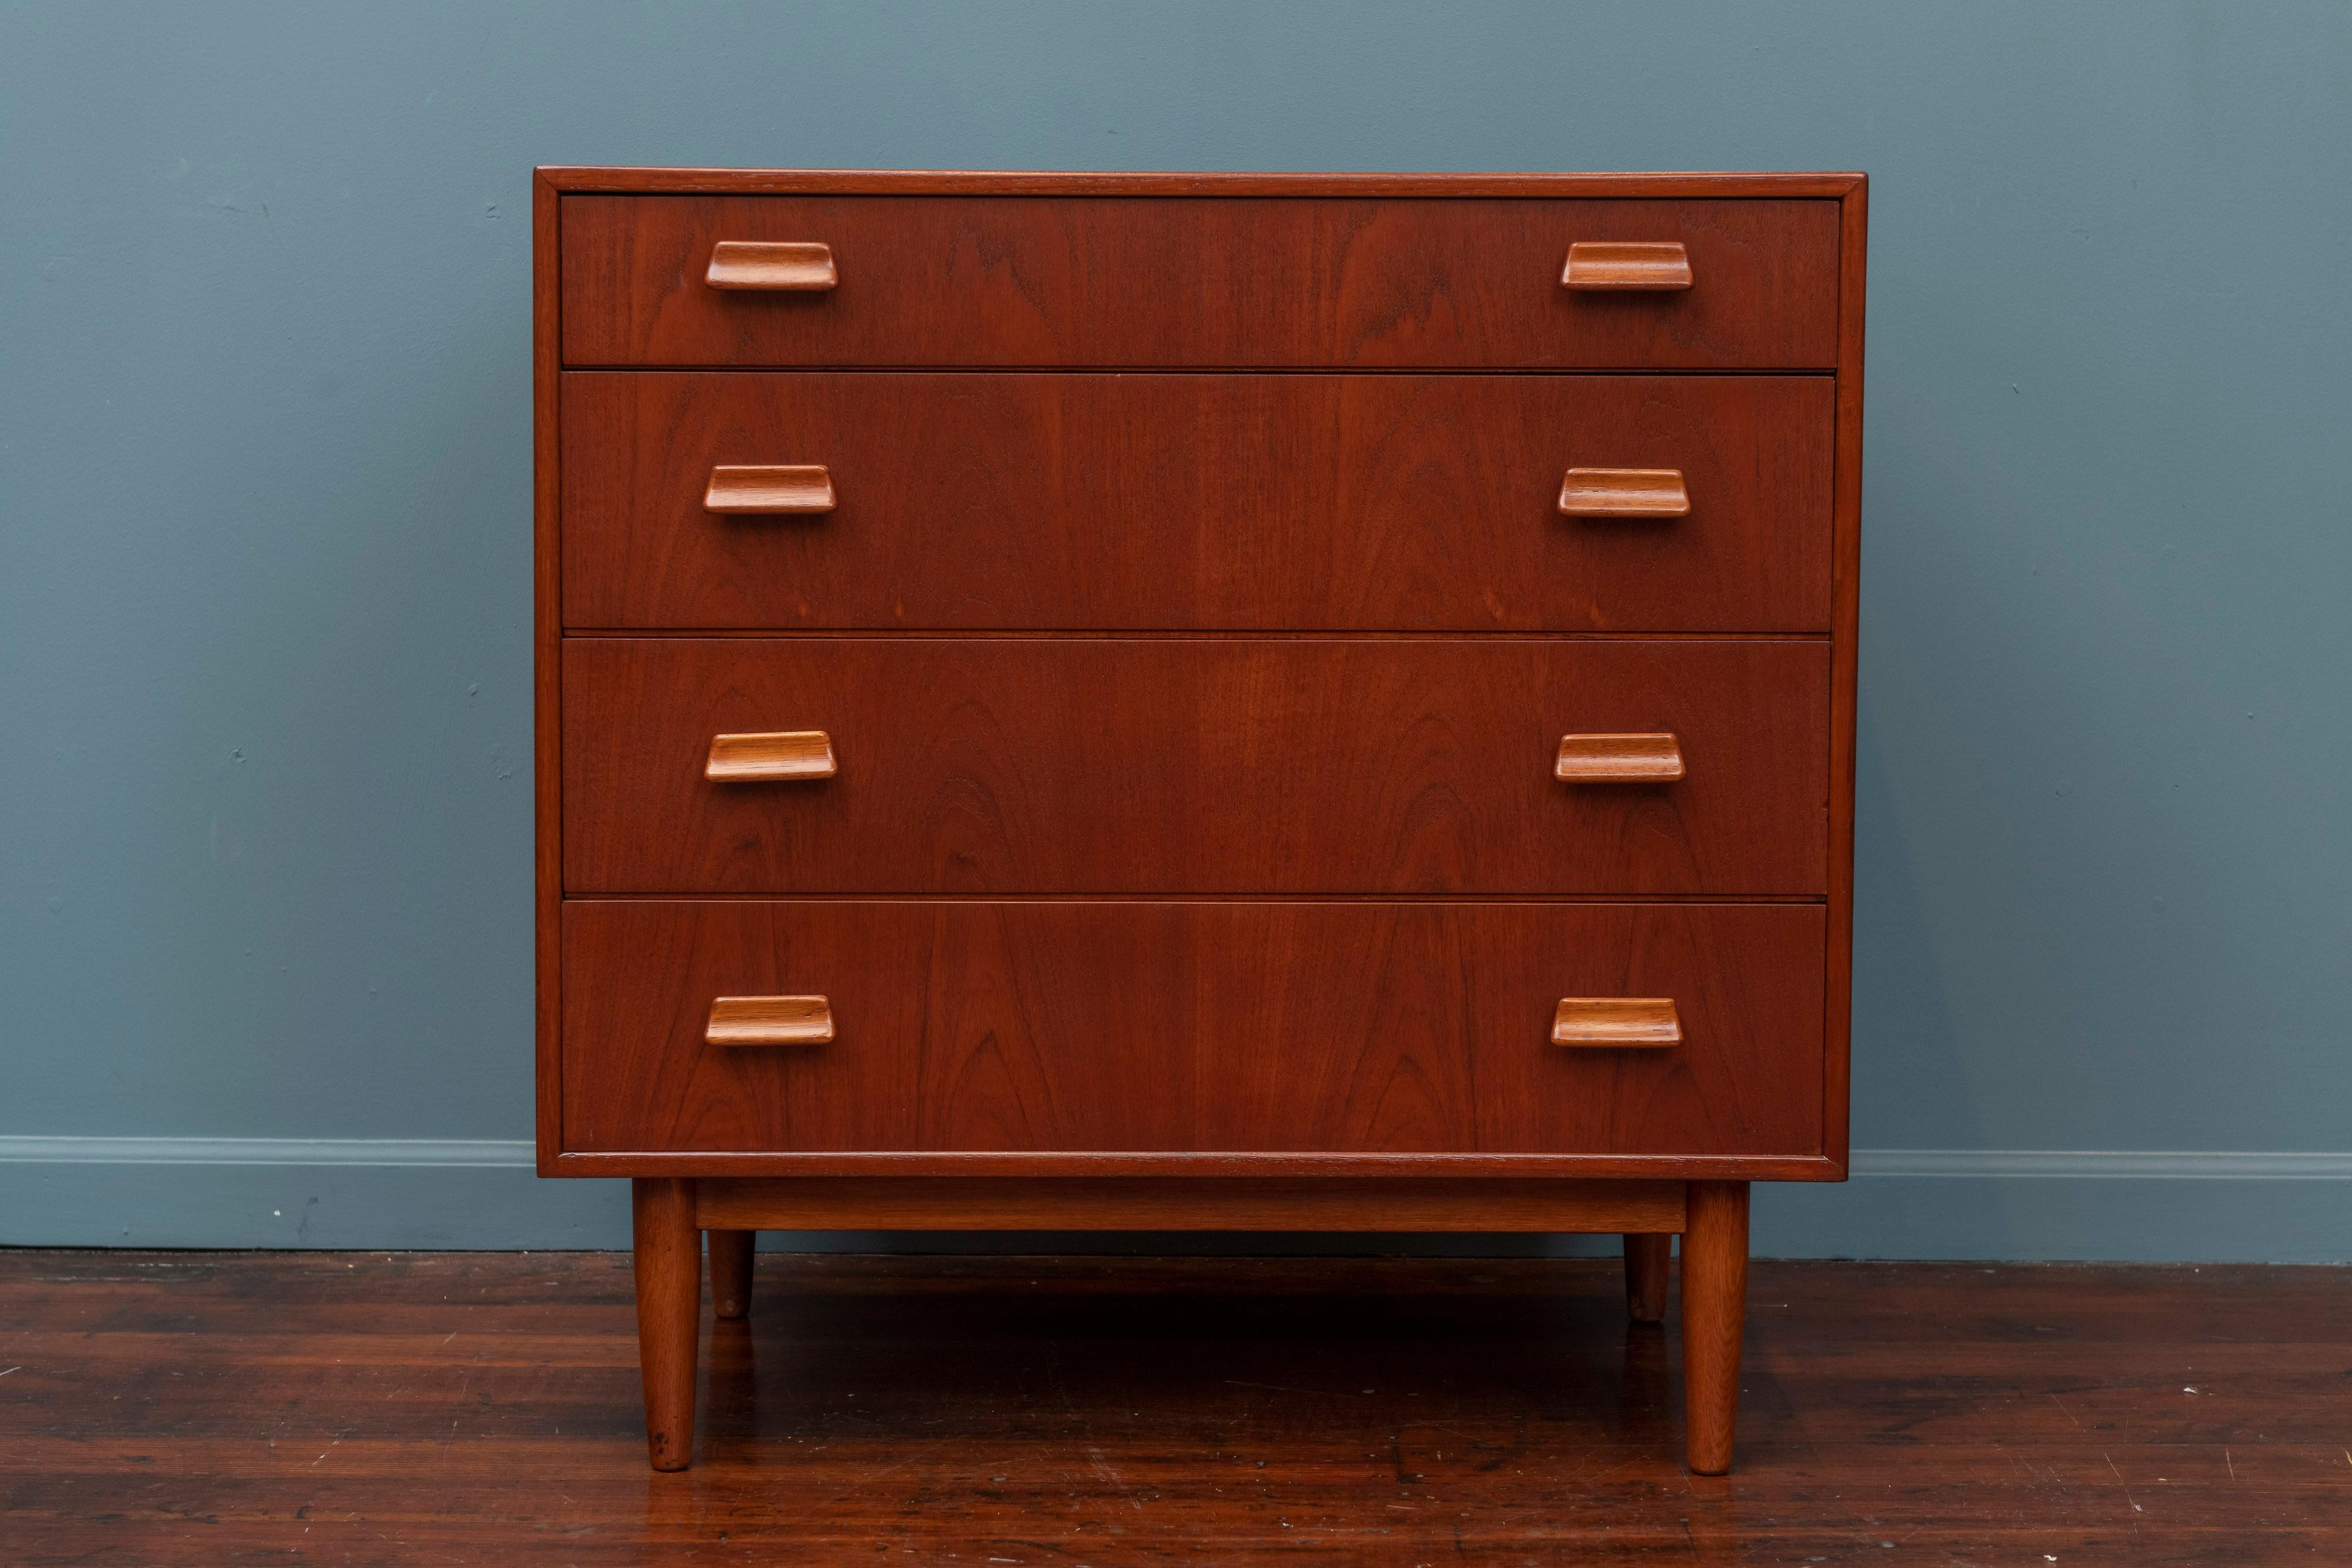 Scandinavian Modern teak dresser by Torben Strandgaard, Denmark. High quality construction 5-drawer chest just newly refinished and ready to enjoy, labeled.